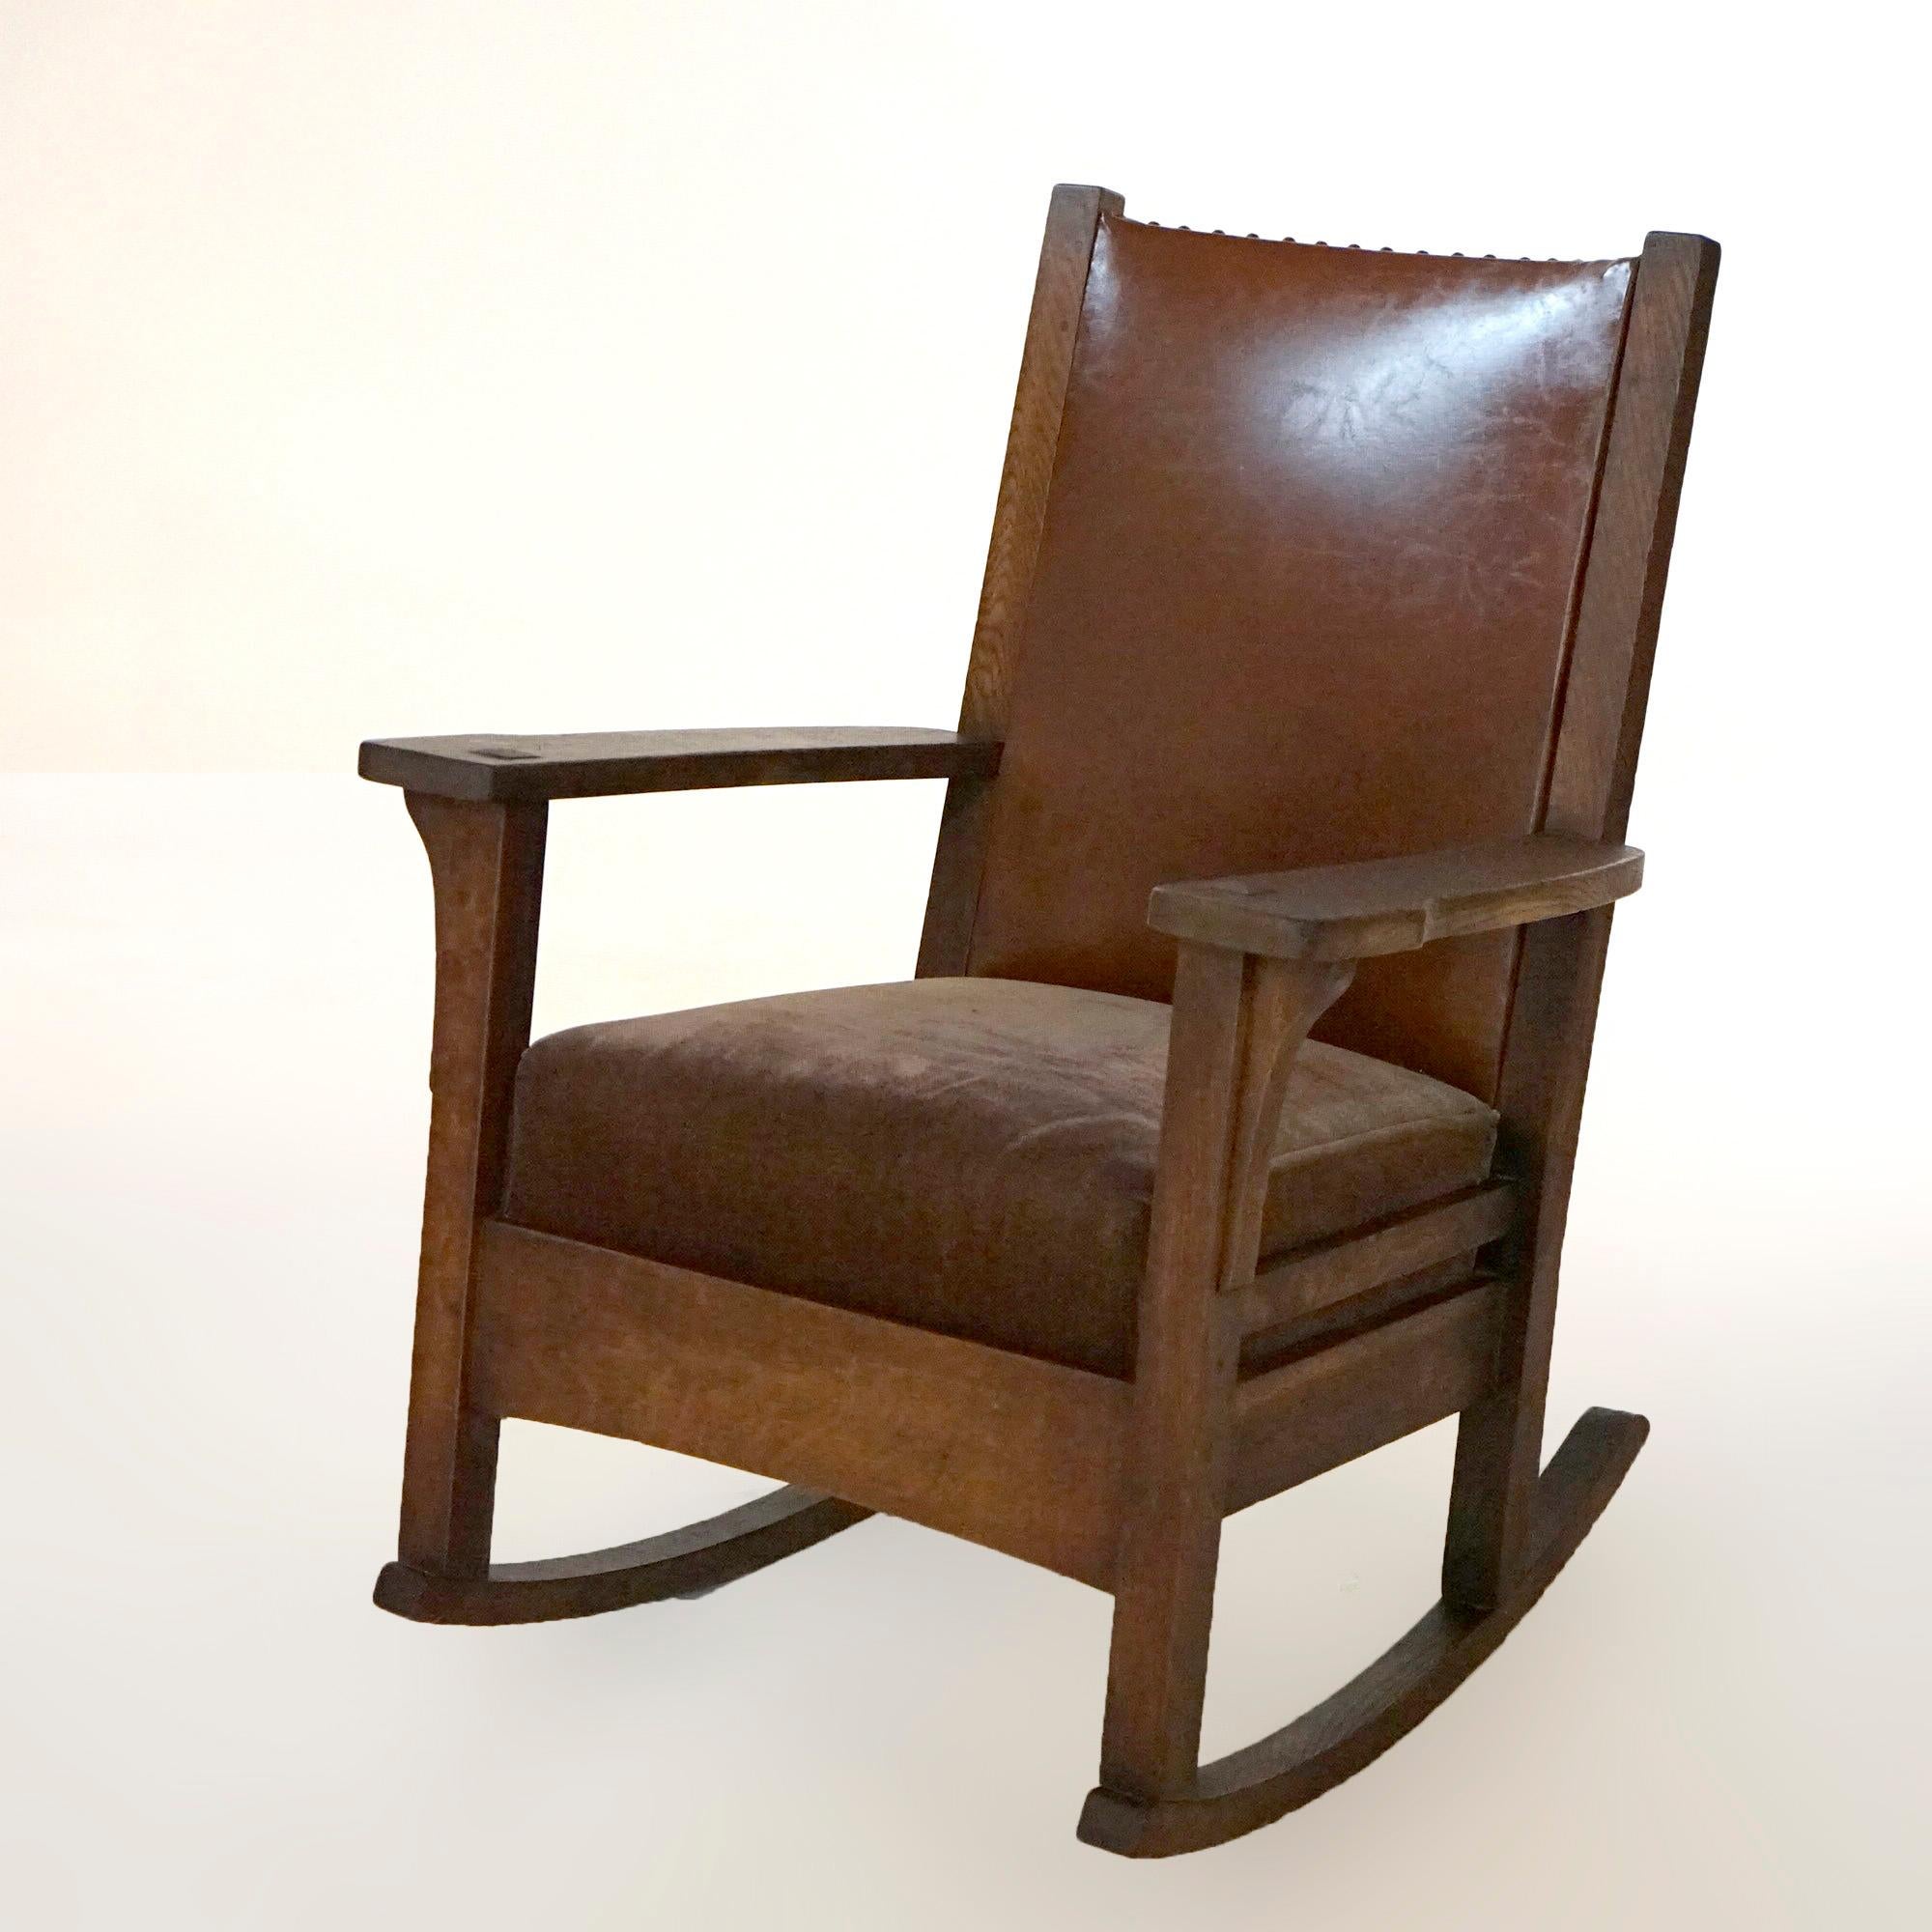 An antique Arts and Crafts Mission rocking chair by JM Young offers quarter sawn oak construction with upholstered back and seat, each arm having concave corbels, c1910.

Measures- 36.5''H x 28''W x 31.75''D; 18.5'' seat height.

*Ask about